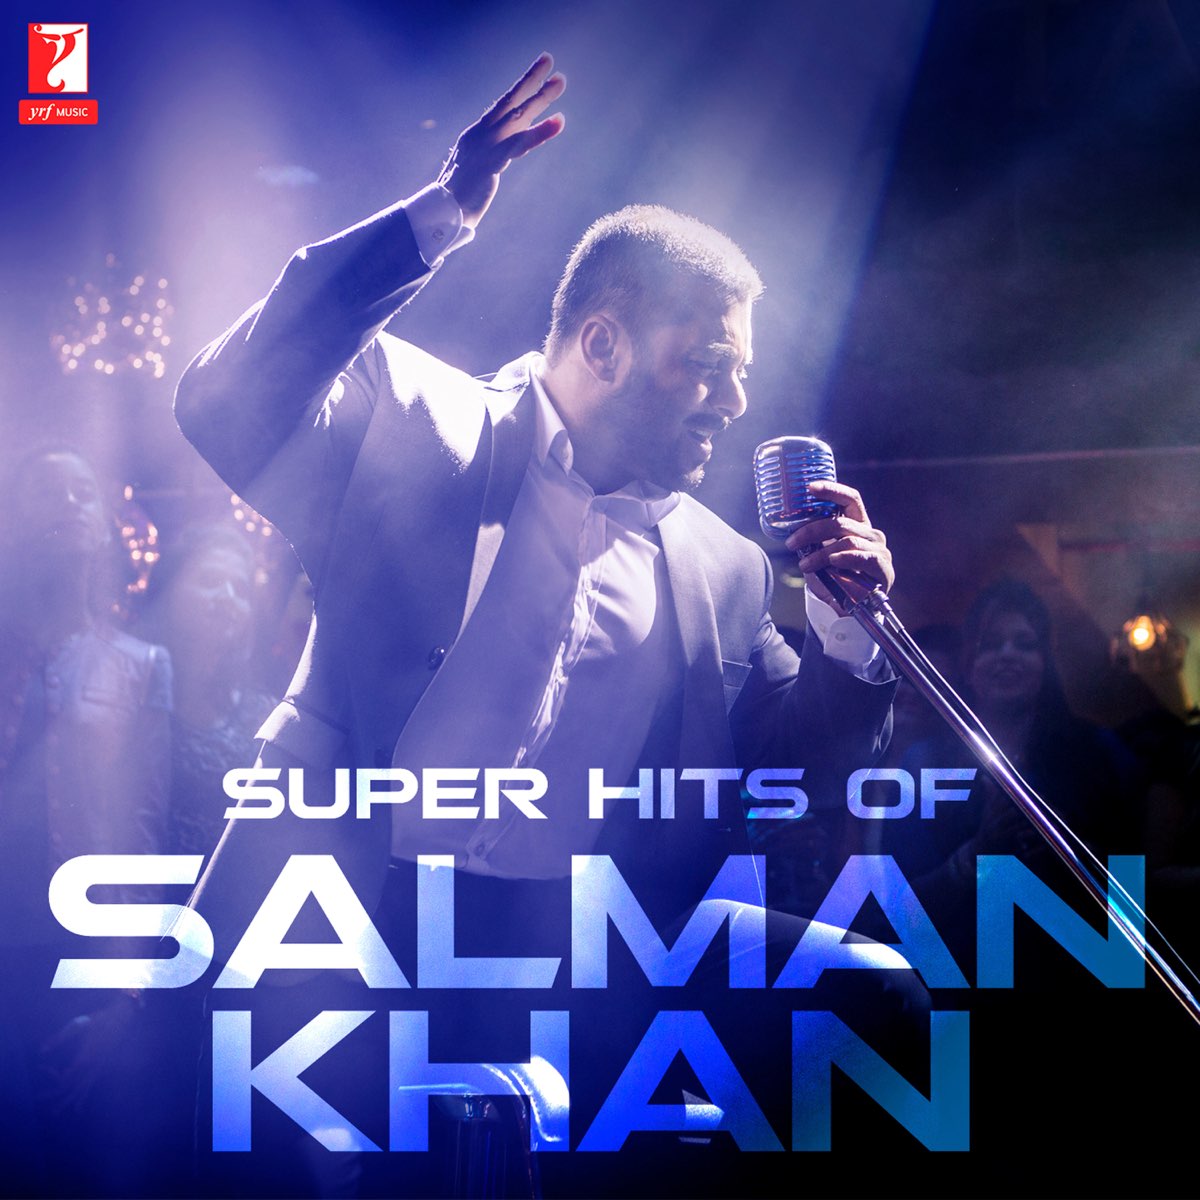 Super Hits of Salman Khan by Various Artists on Apple Music